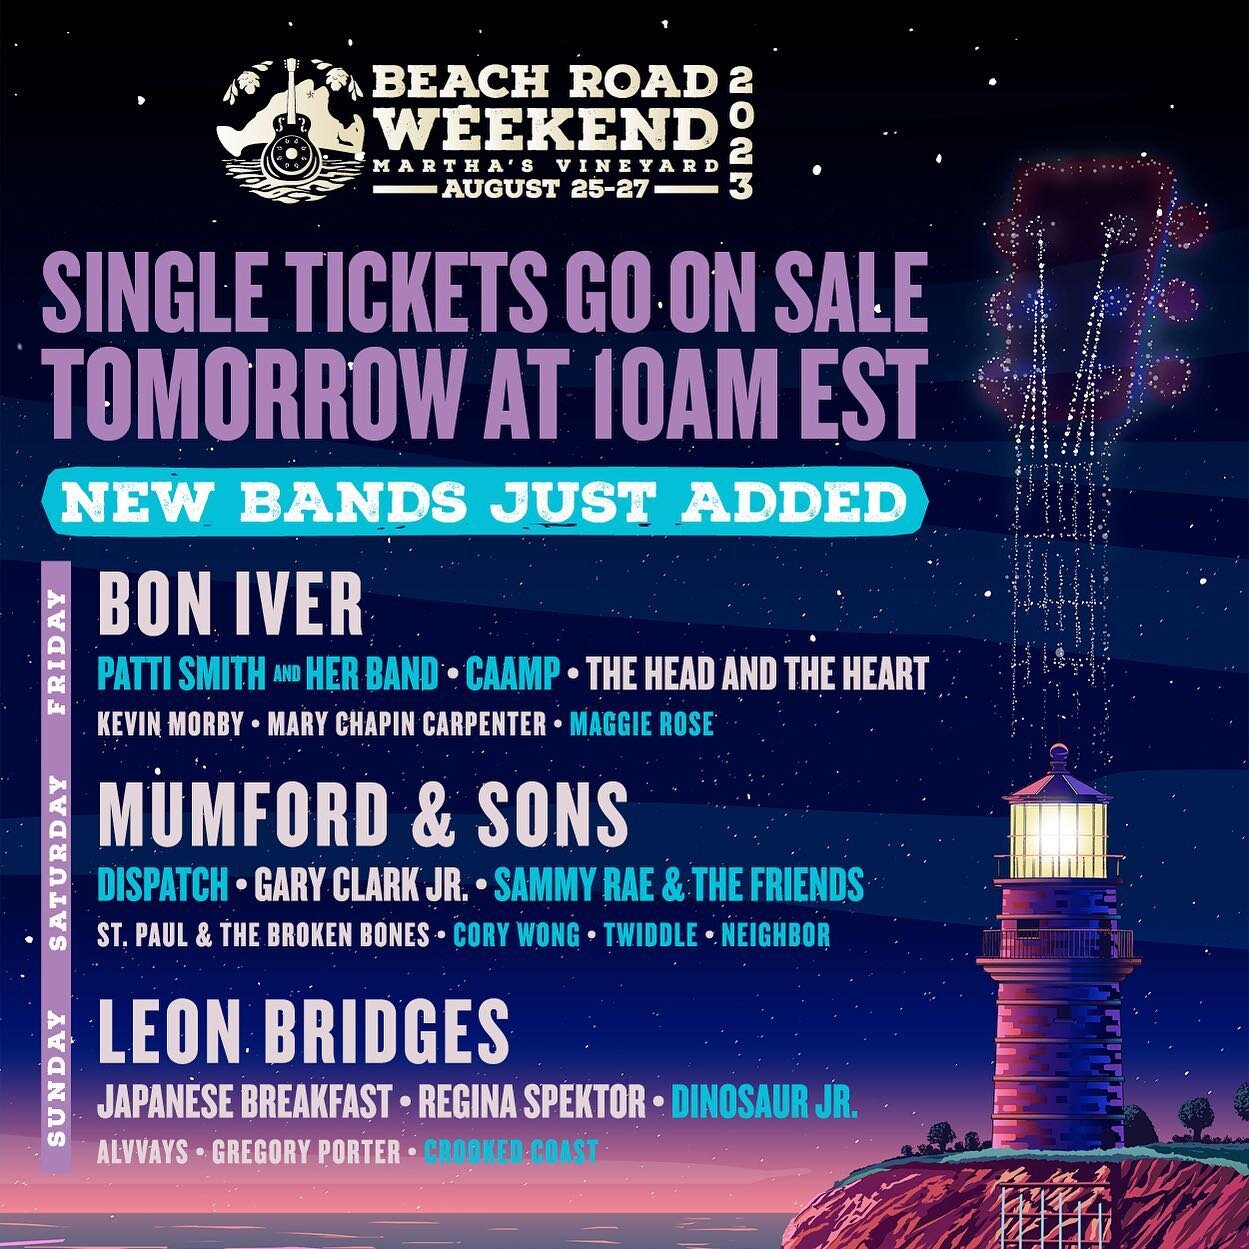 We just added another date to our Summer festival schedule with @beachroadweekend on August 26! See you at the vineyard 🍇💚

Tickets on sale tomorrow &gt;&gt;&gt; beachroadweekend.com